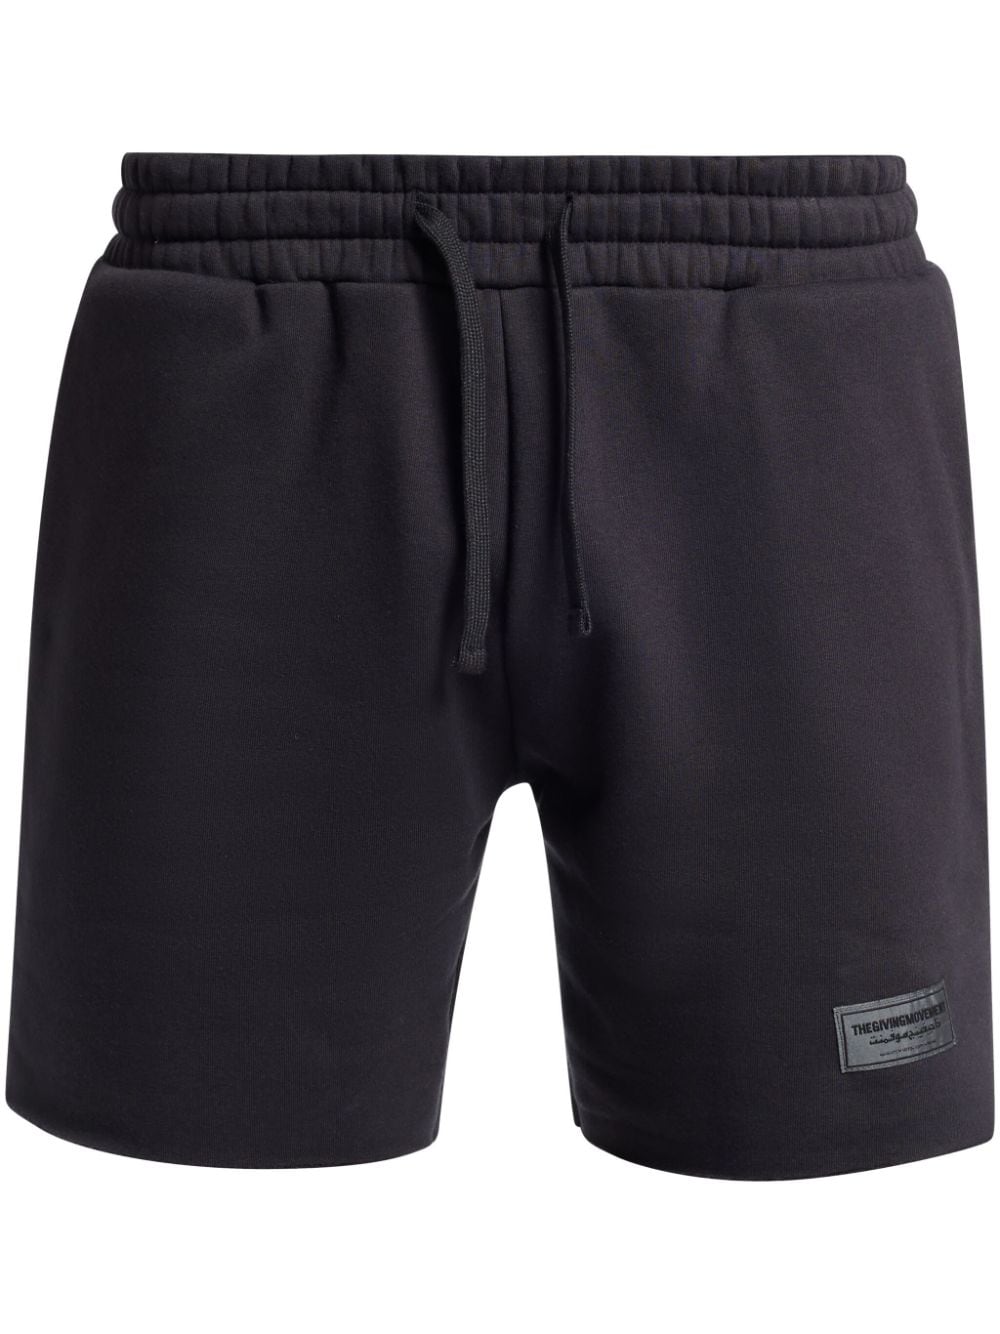 THE GIVING MOVEMENT cotton-blend track shorts - Black von THE GIVING MOVEMENT